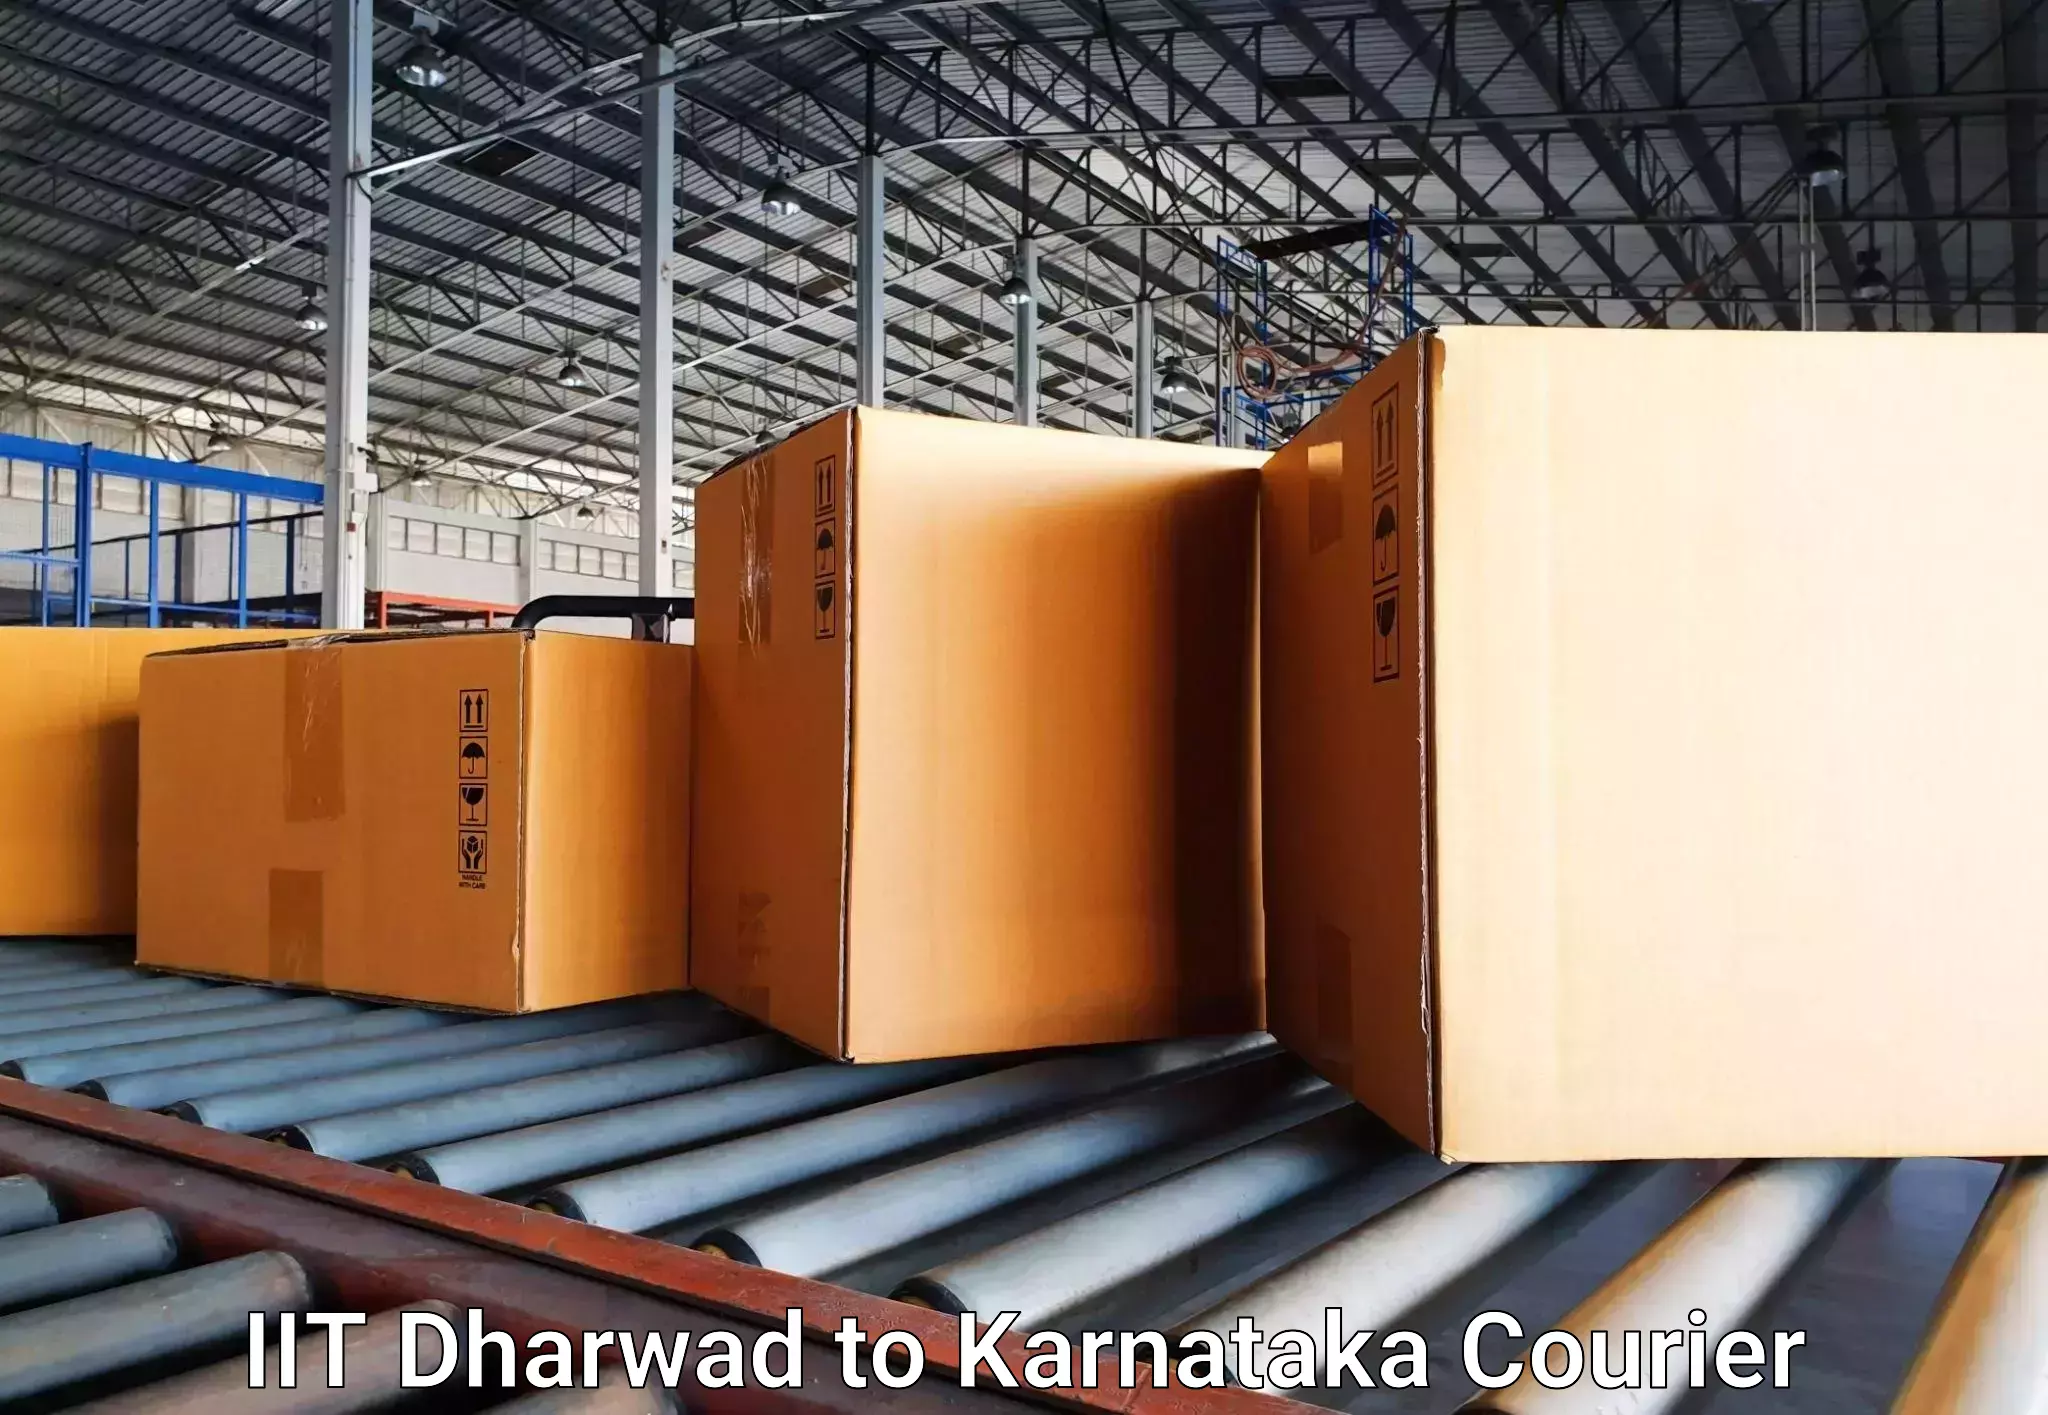 Hassle-free luggage shipping in IIT Dharwad to Channapatna